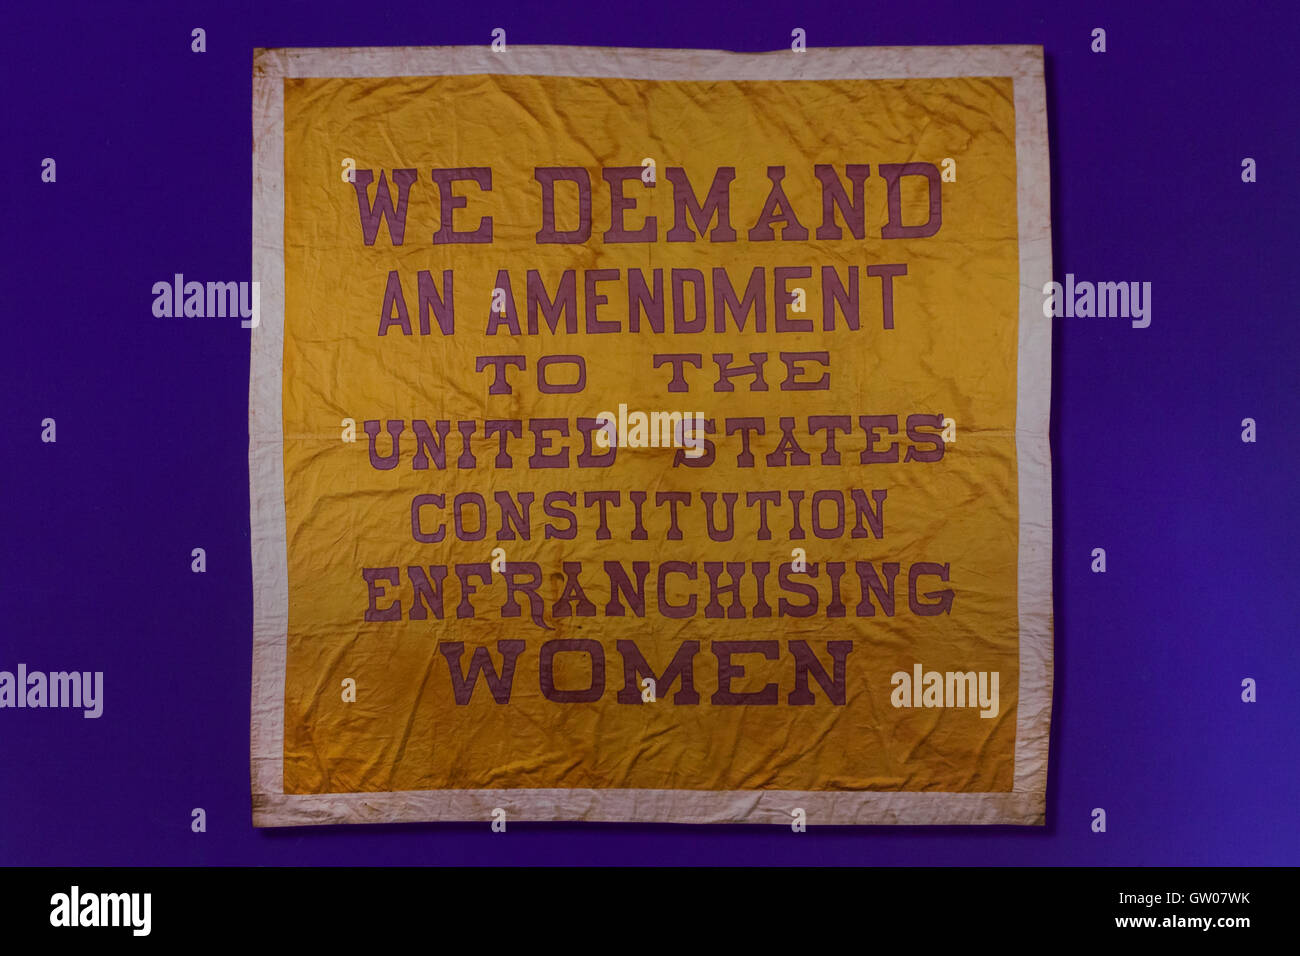 Banner with message 'We Demand an Amendment to the United States Constitution Enfranchising Women' during Women's Suffrage movement - USA Stock Photo